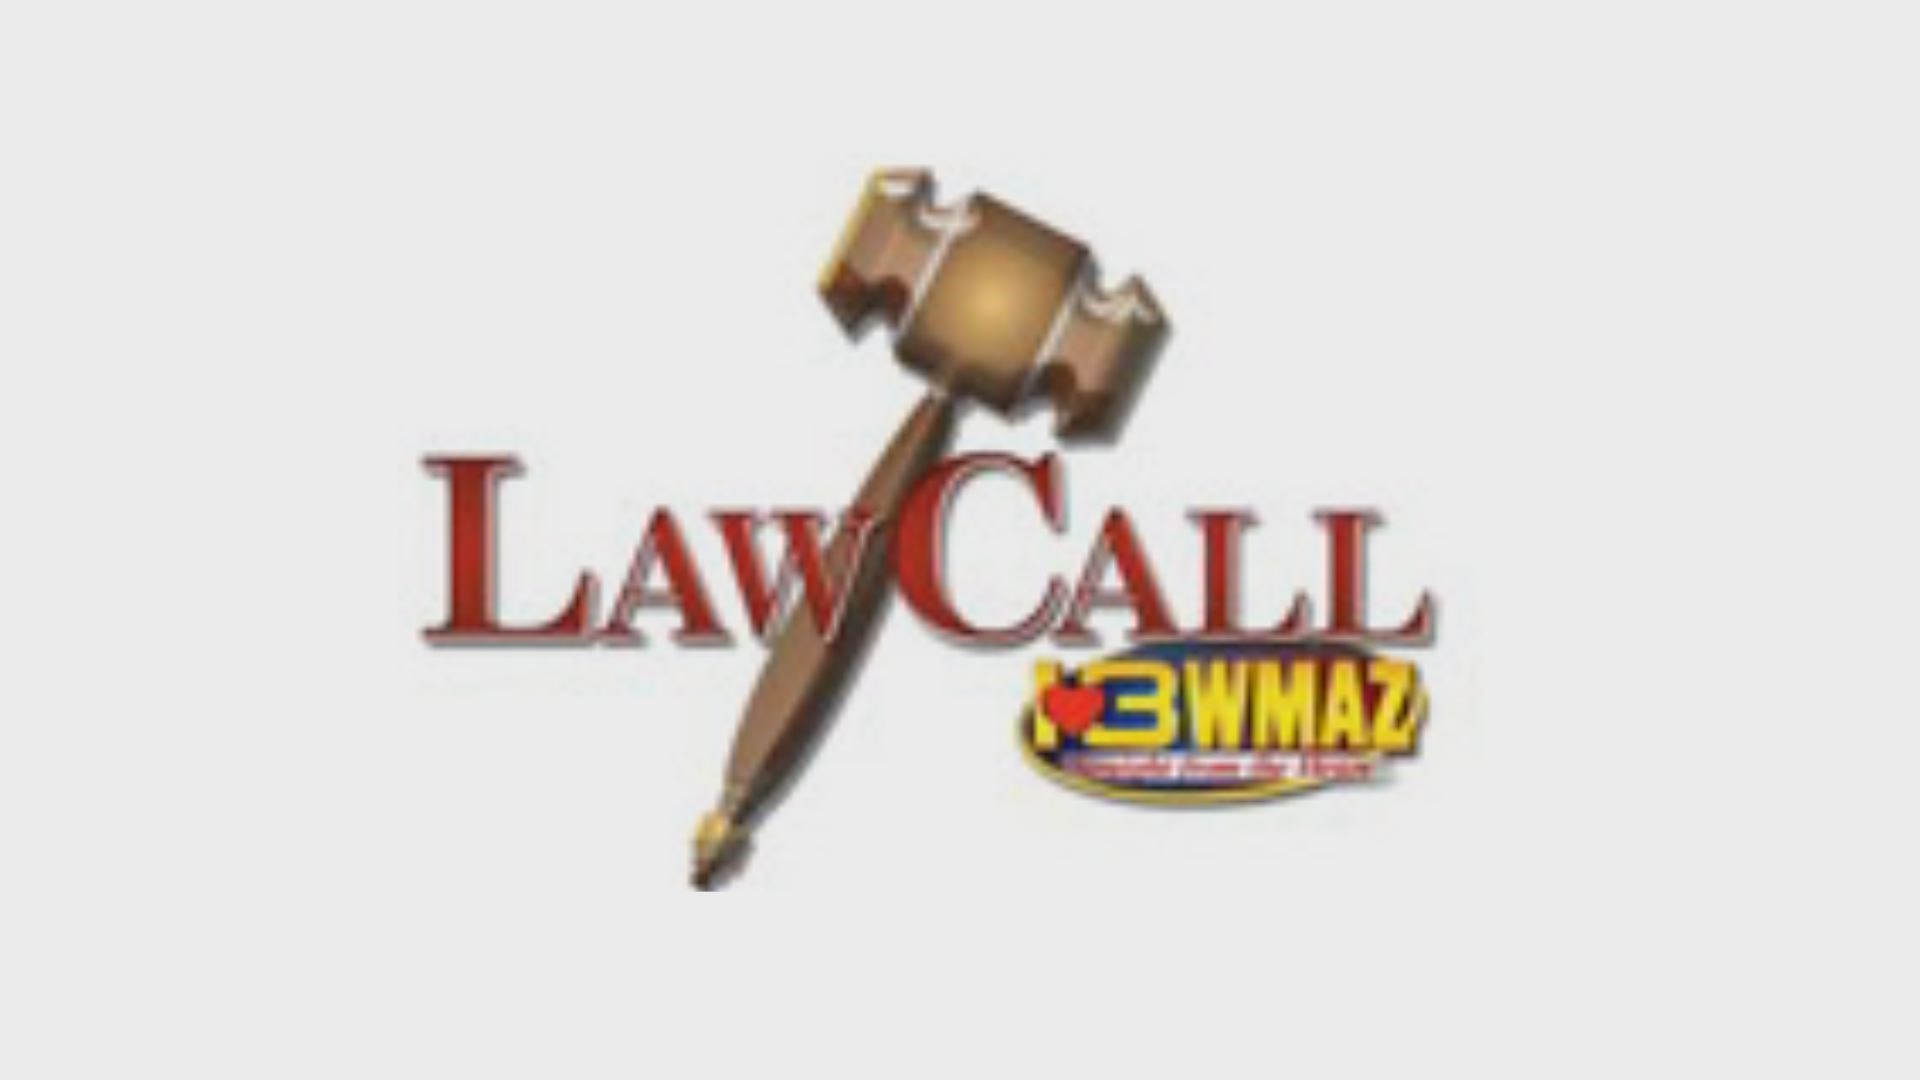 Carl Reynolds explains why we are airing taped shows of LawCall instead of live shows. Here's how you can still contact the lawyers with legal questions.